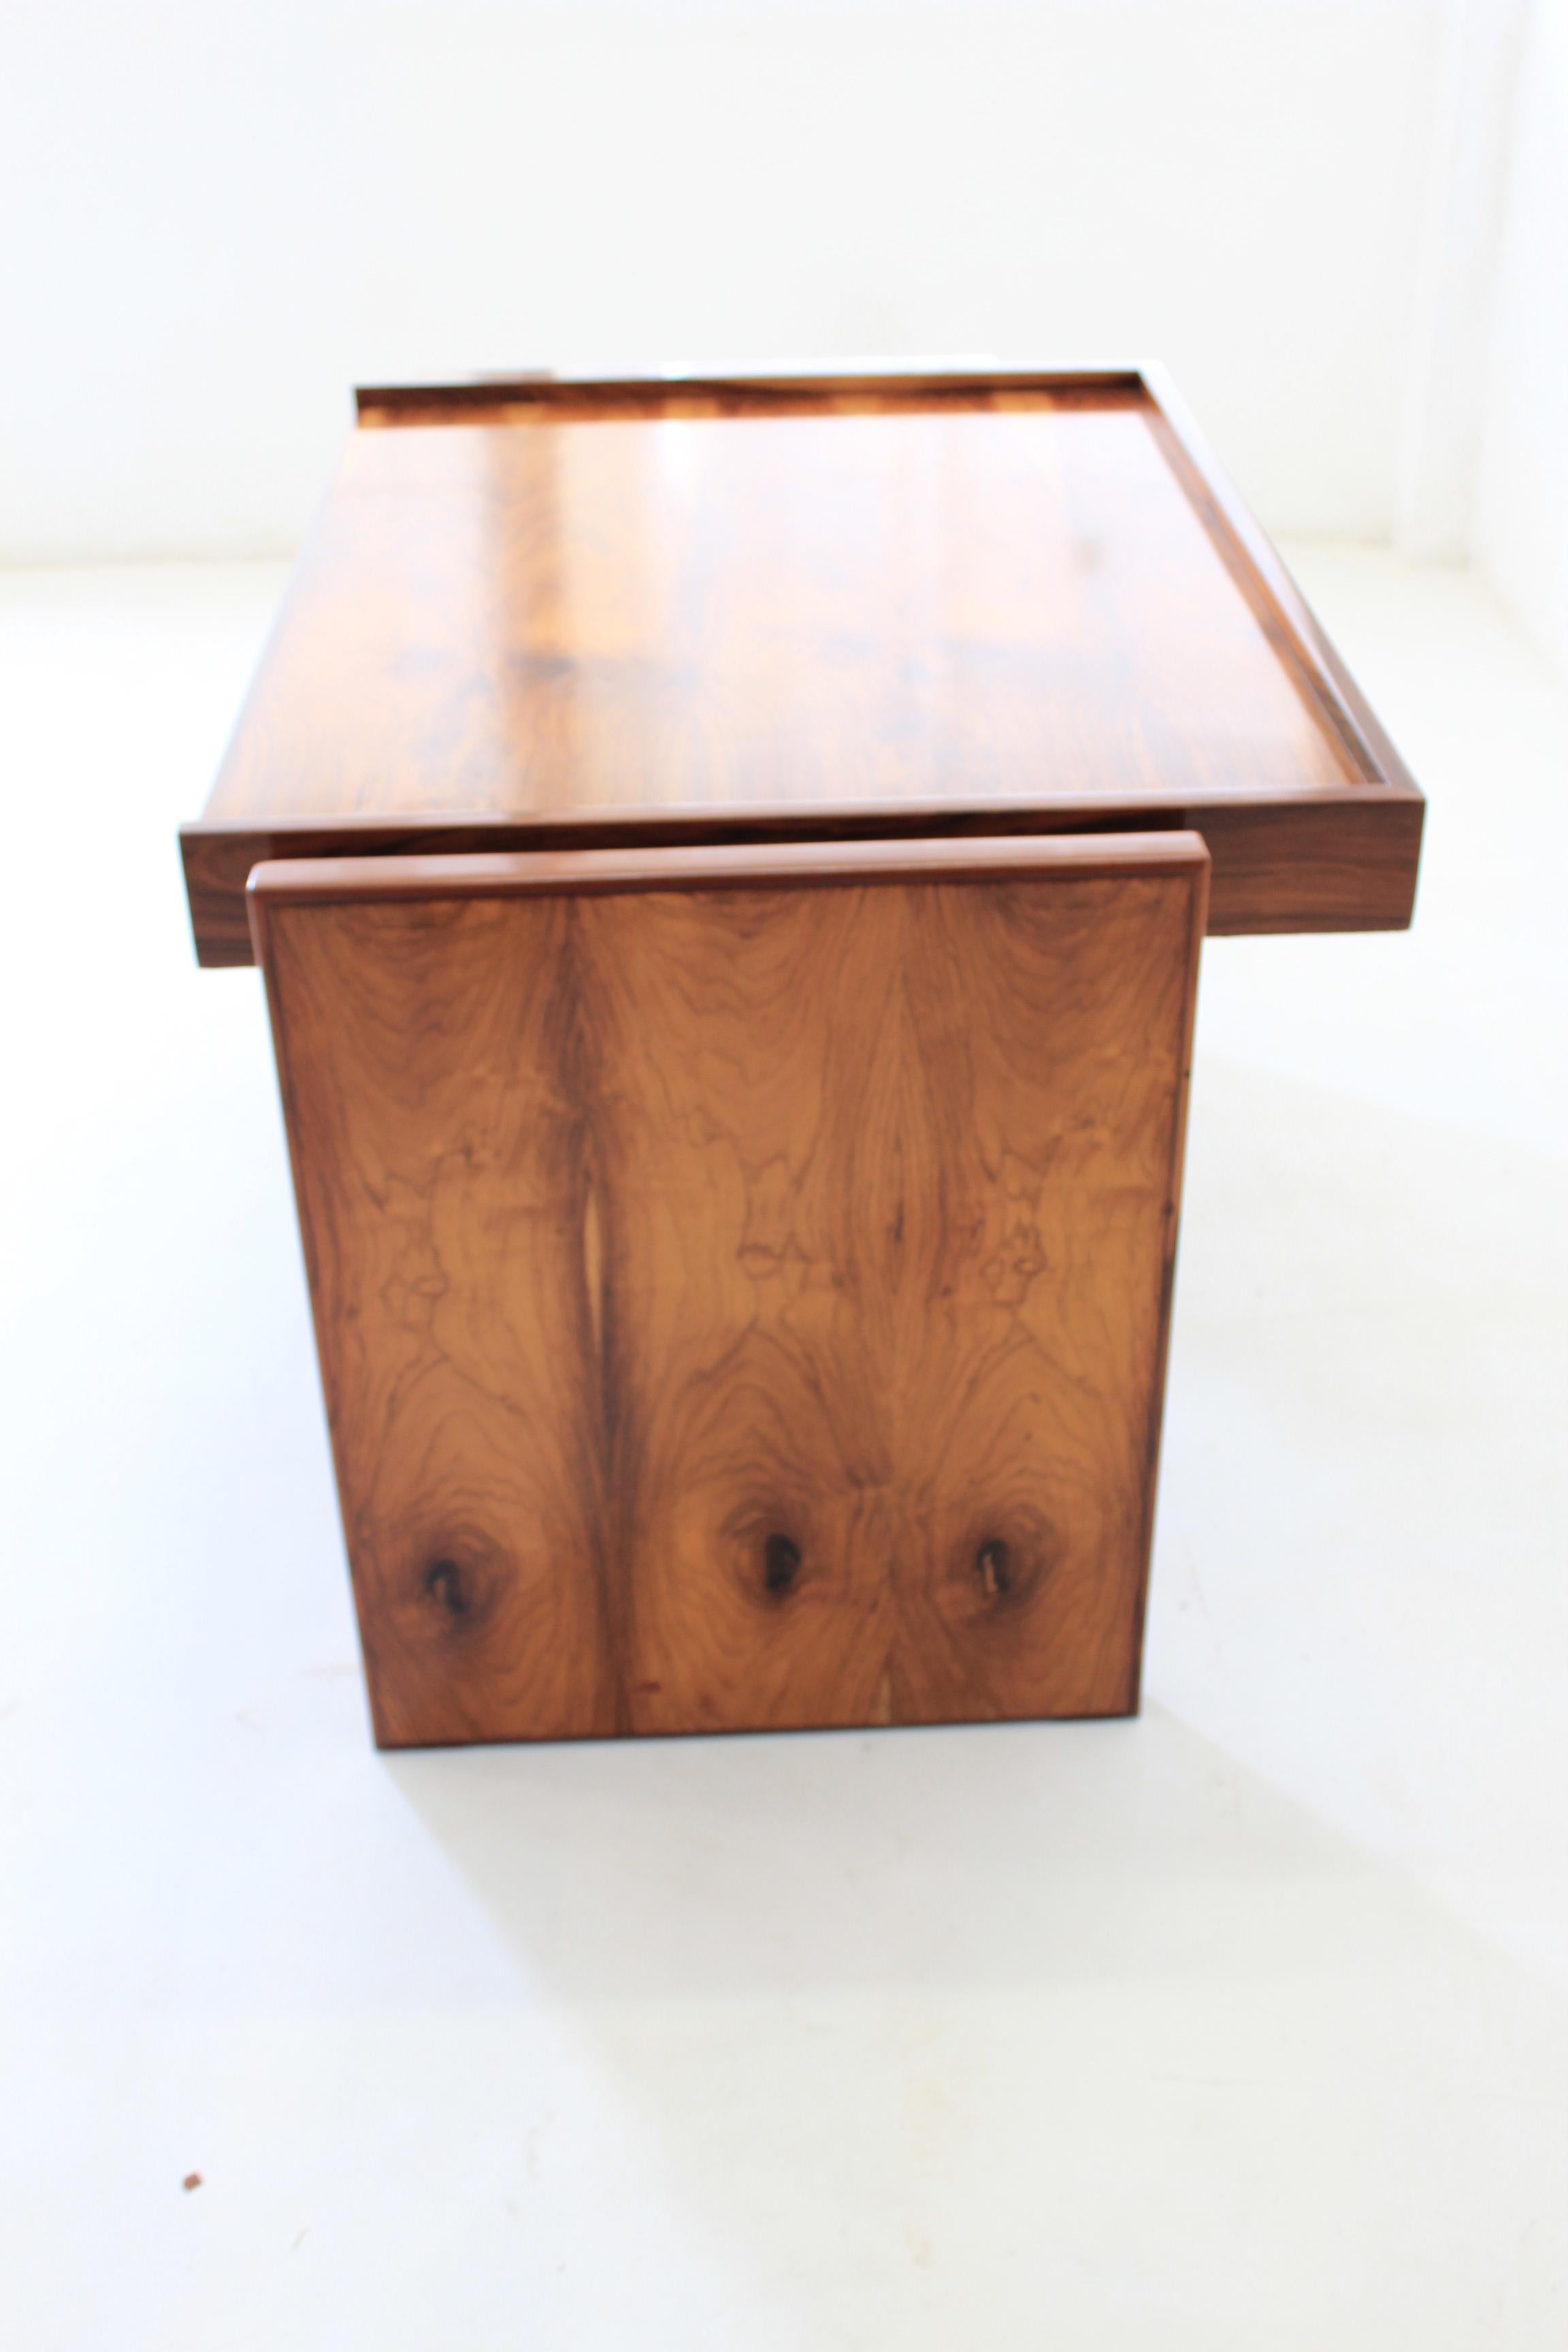 Brazilian Rosewood Desk in style of Joaquim Tenreiro In Excellent Condition For Sale In Sao Paulo, SP